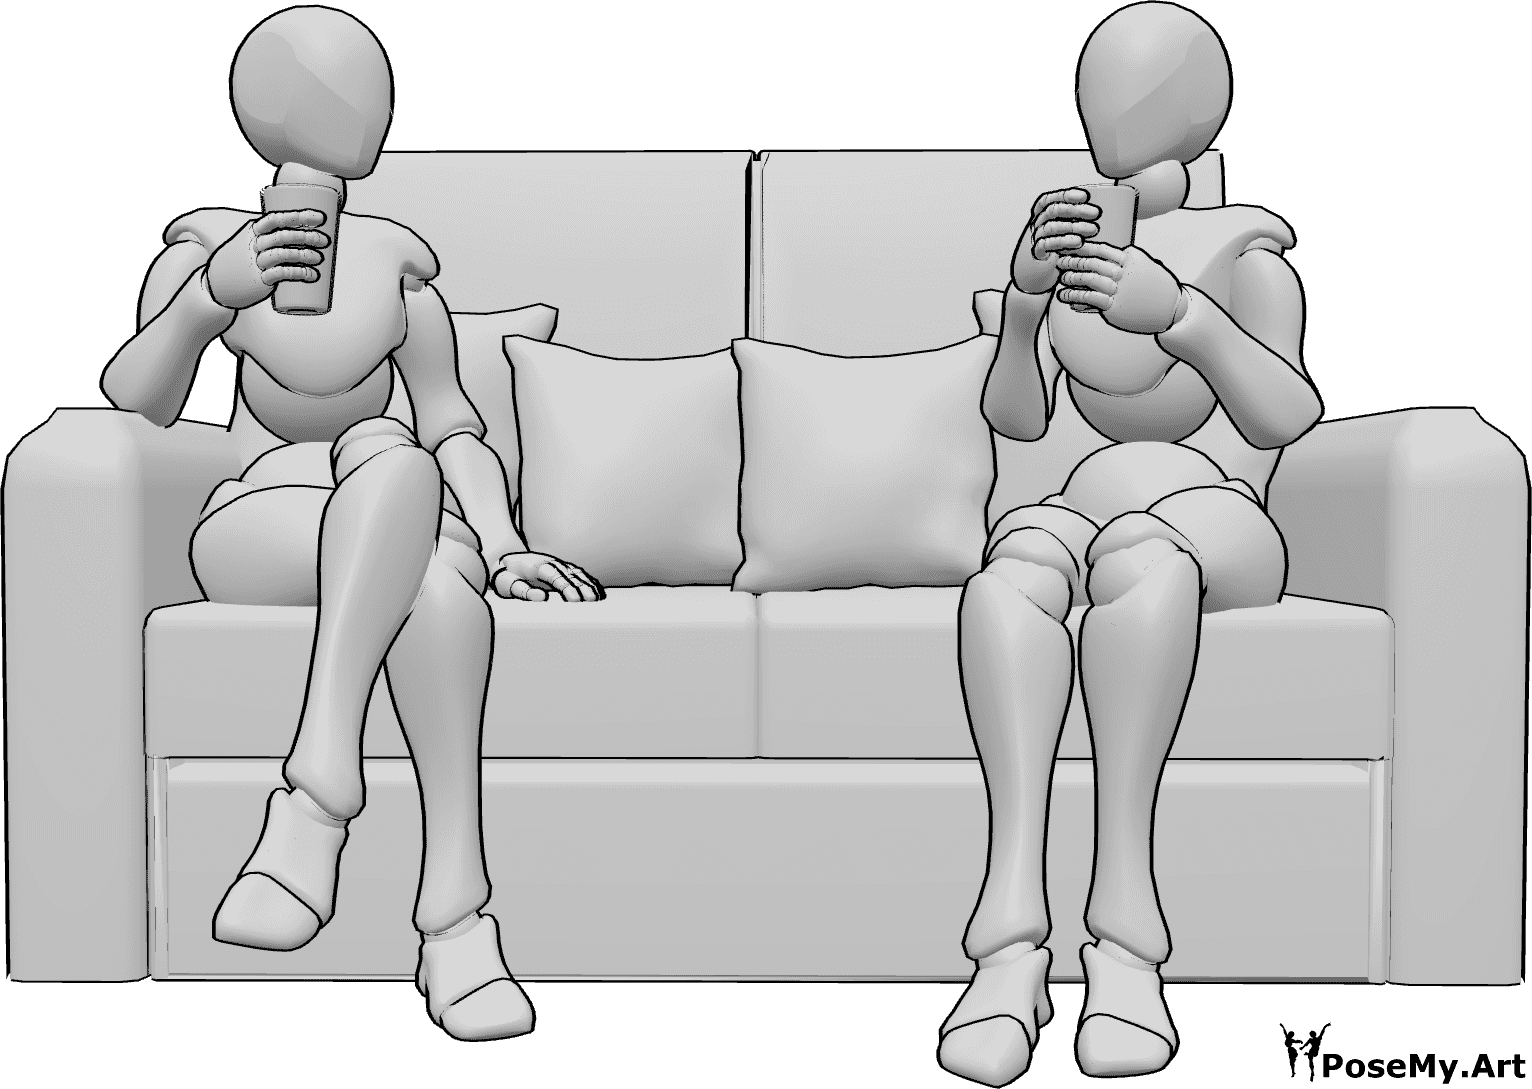 Pose Reference- Two females drinking pose - Two females are sitting on a couch and holding glasses, drinking something